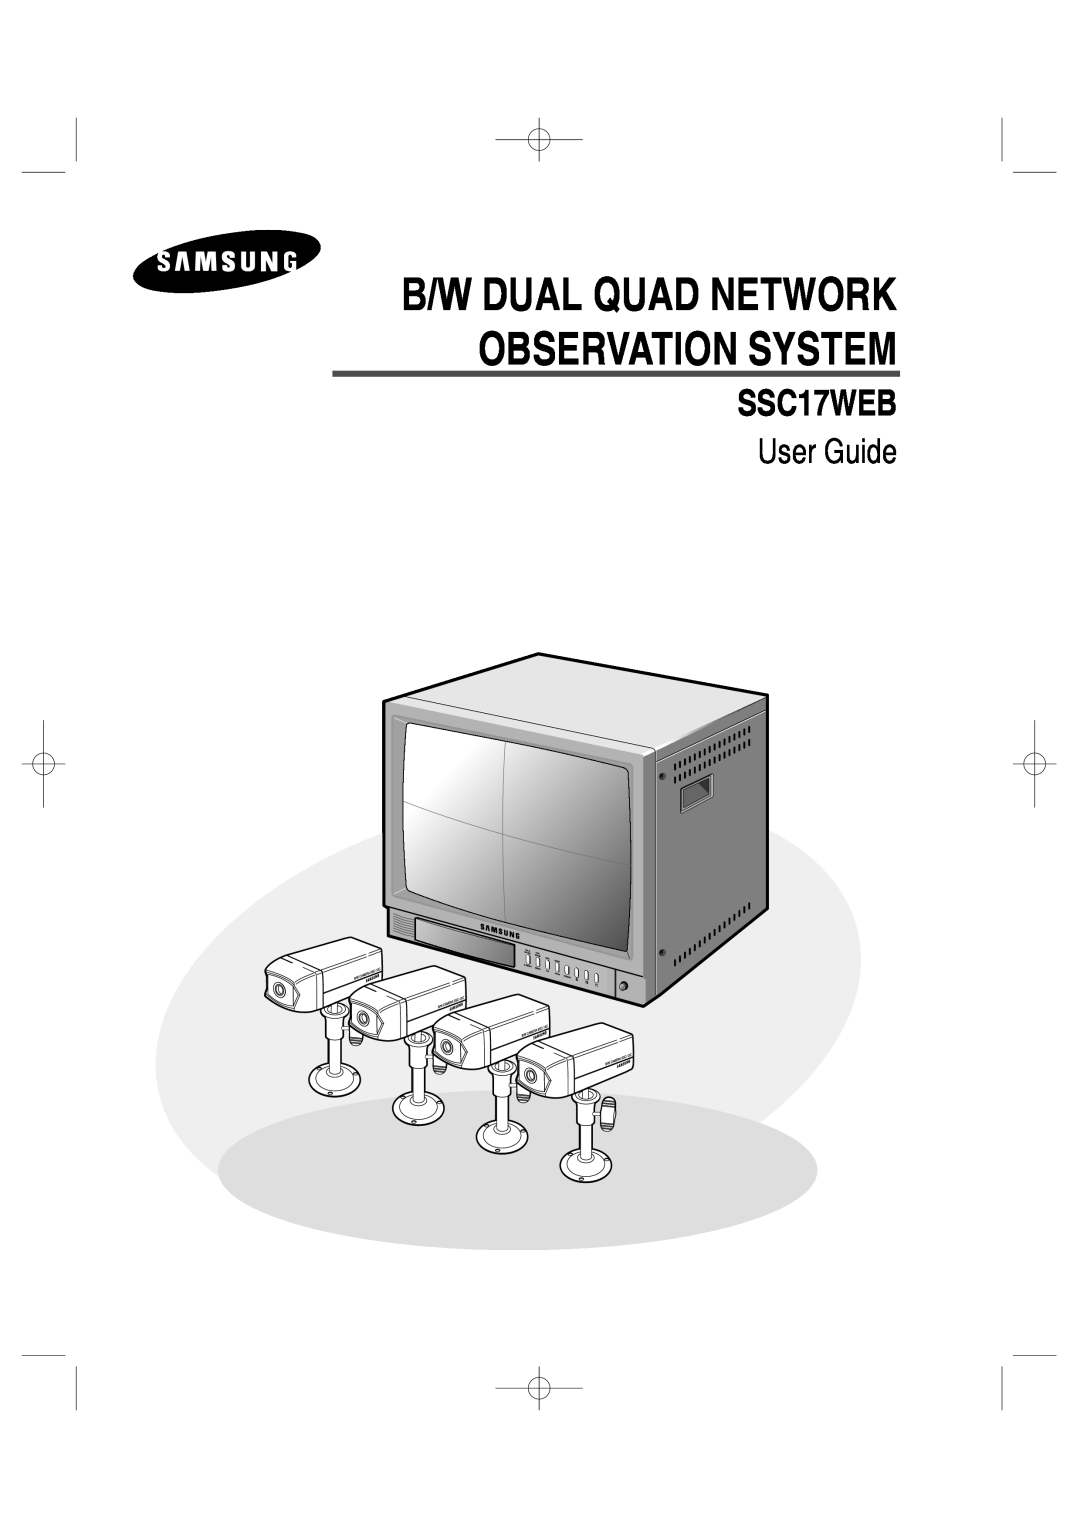 Samsung SSC17WEB manual B/W Dual Quad Network Observation System, User Guide 